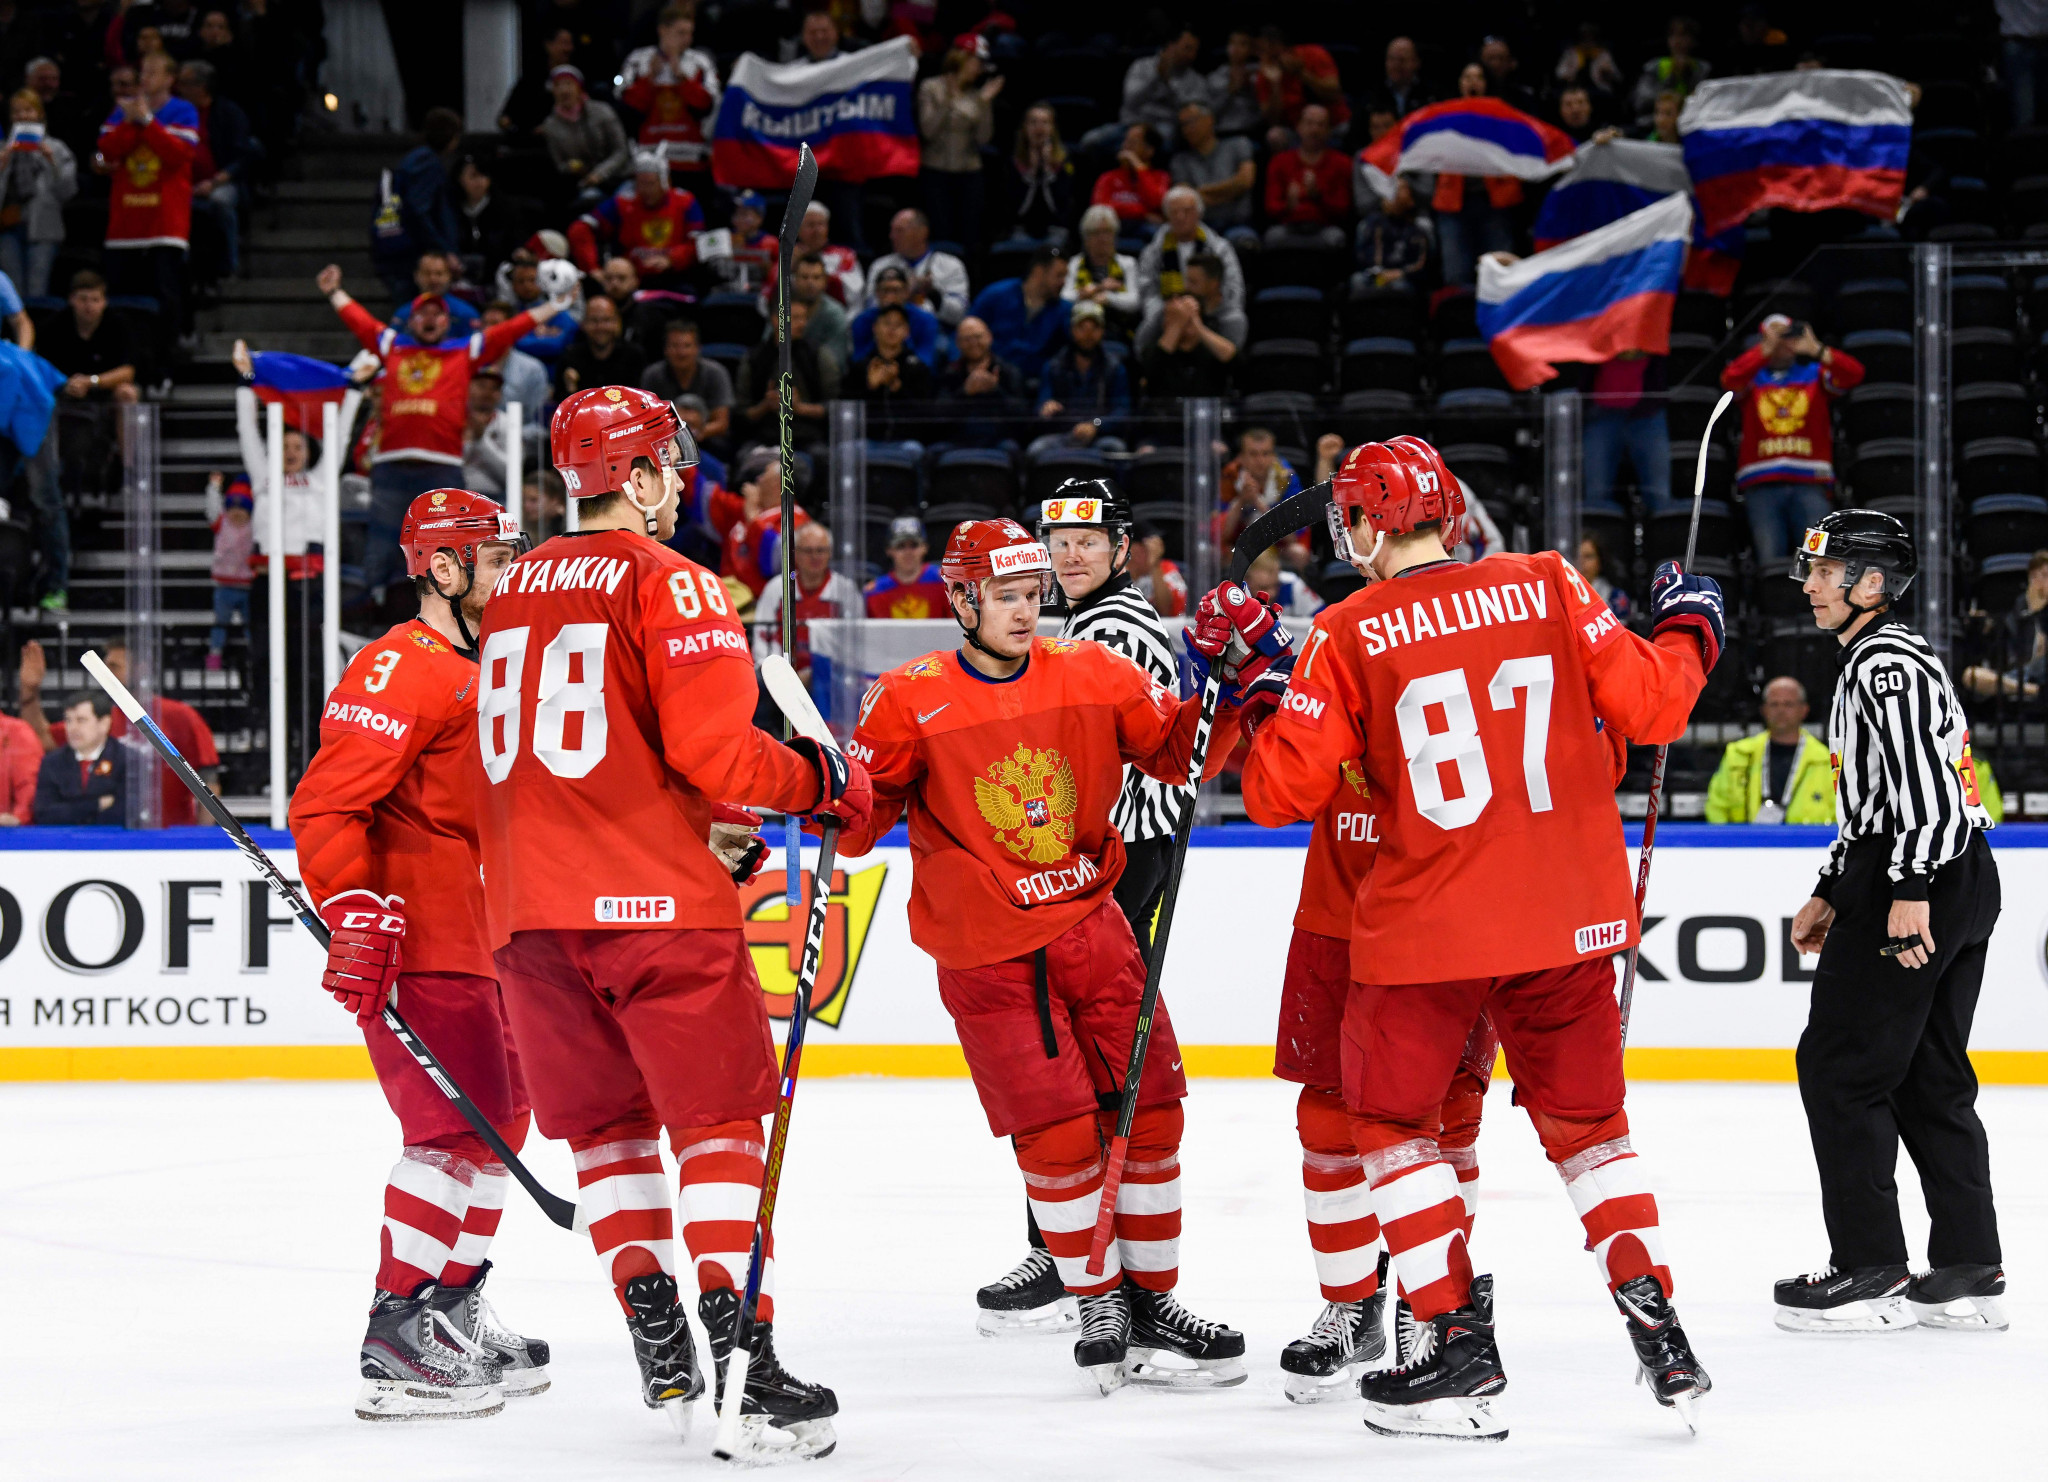 Russia thrash Belarus to remain top of group at IIHF World Championship